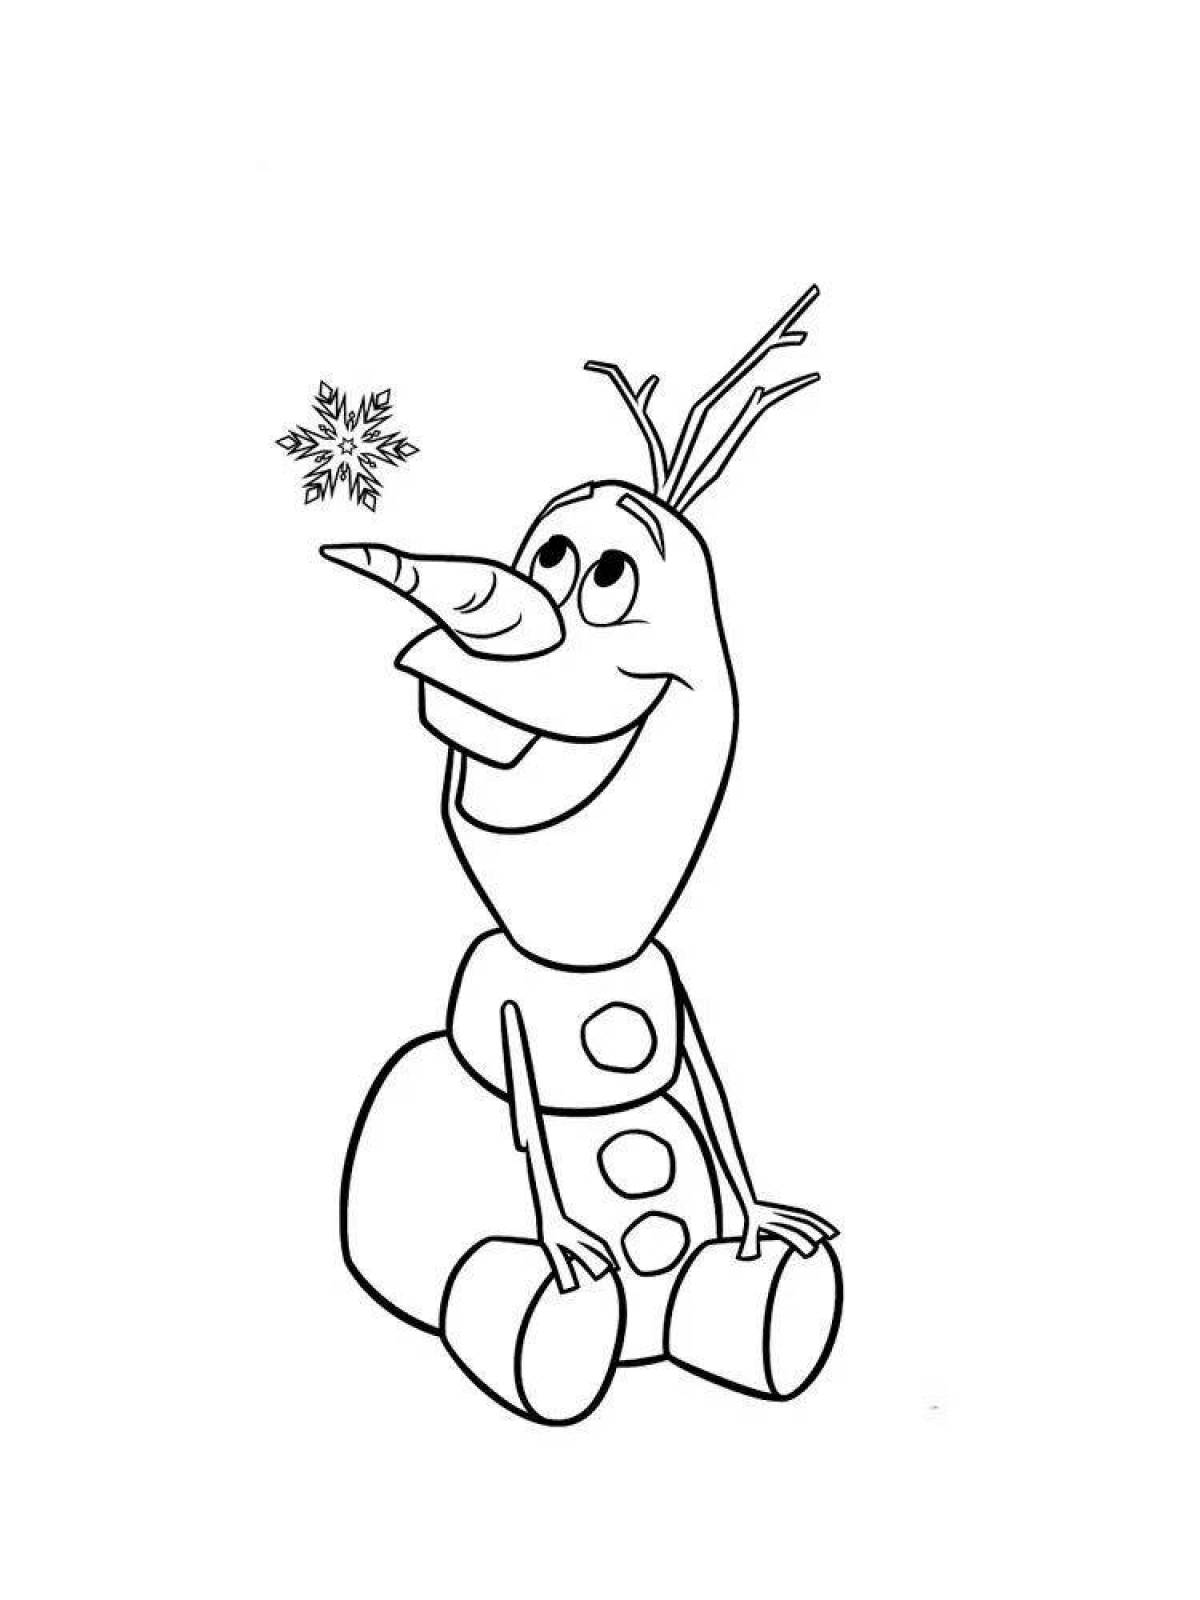 Olaf's humorous snowman coloring book